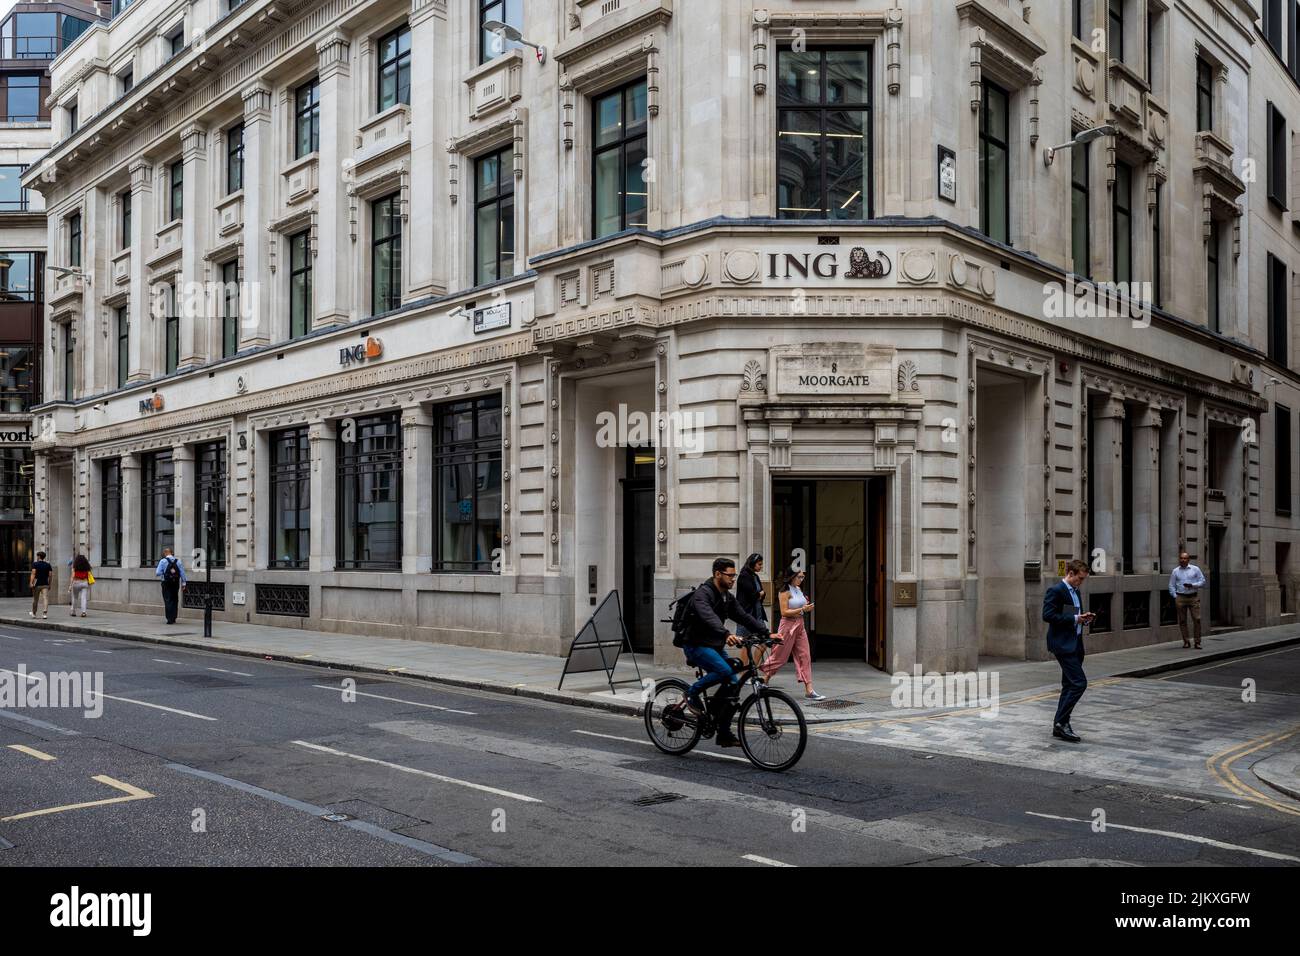 ING Bank London - ING Bank Offices in Moorgate in the City of London, handling ING’s UK Wholesale Banking operations. Stock Photo